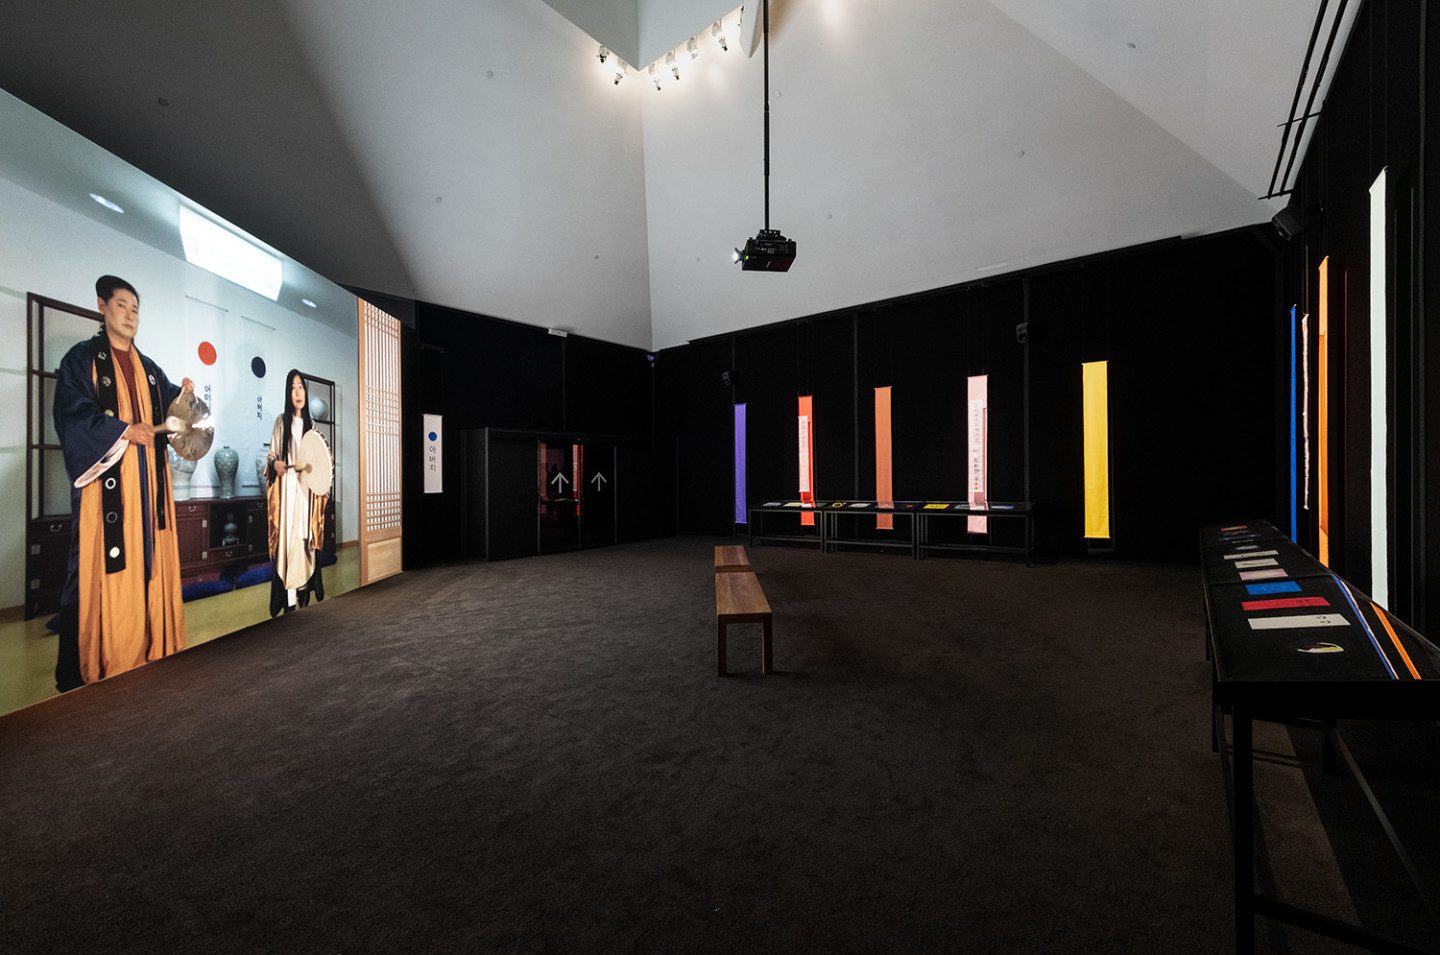 Installation view over the artwork "Four Months, Four Million Light Years".